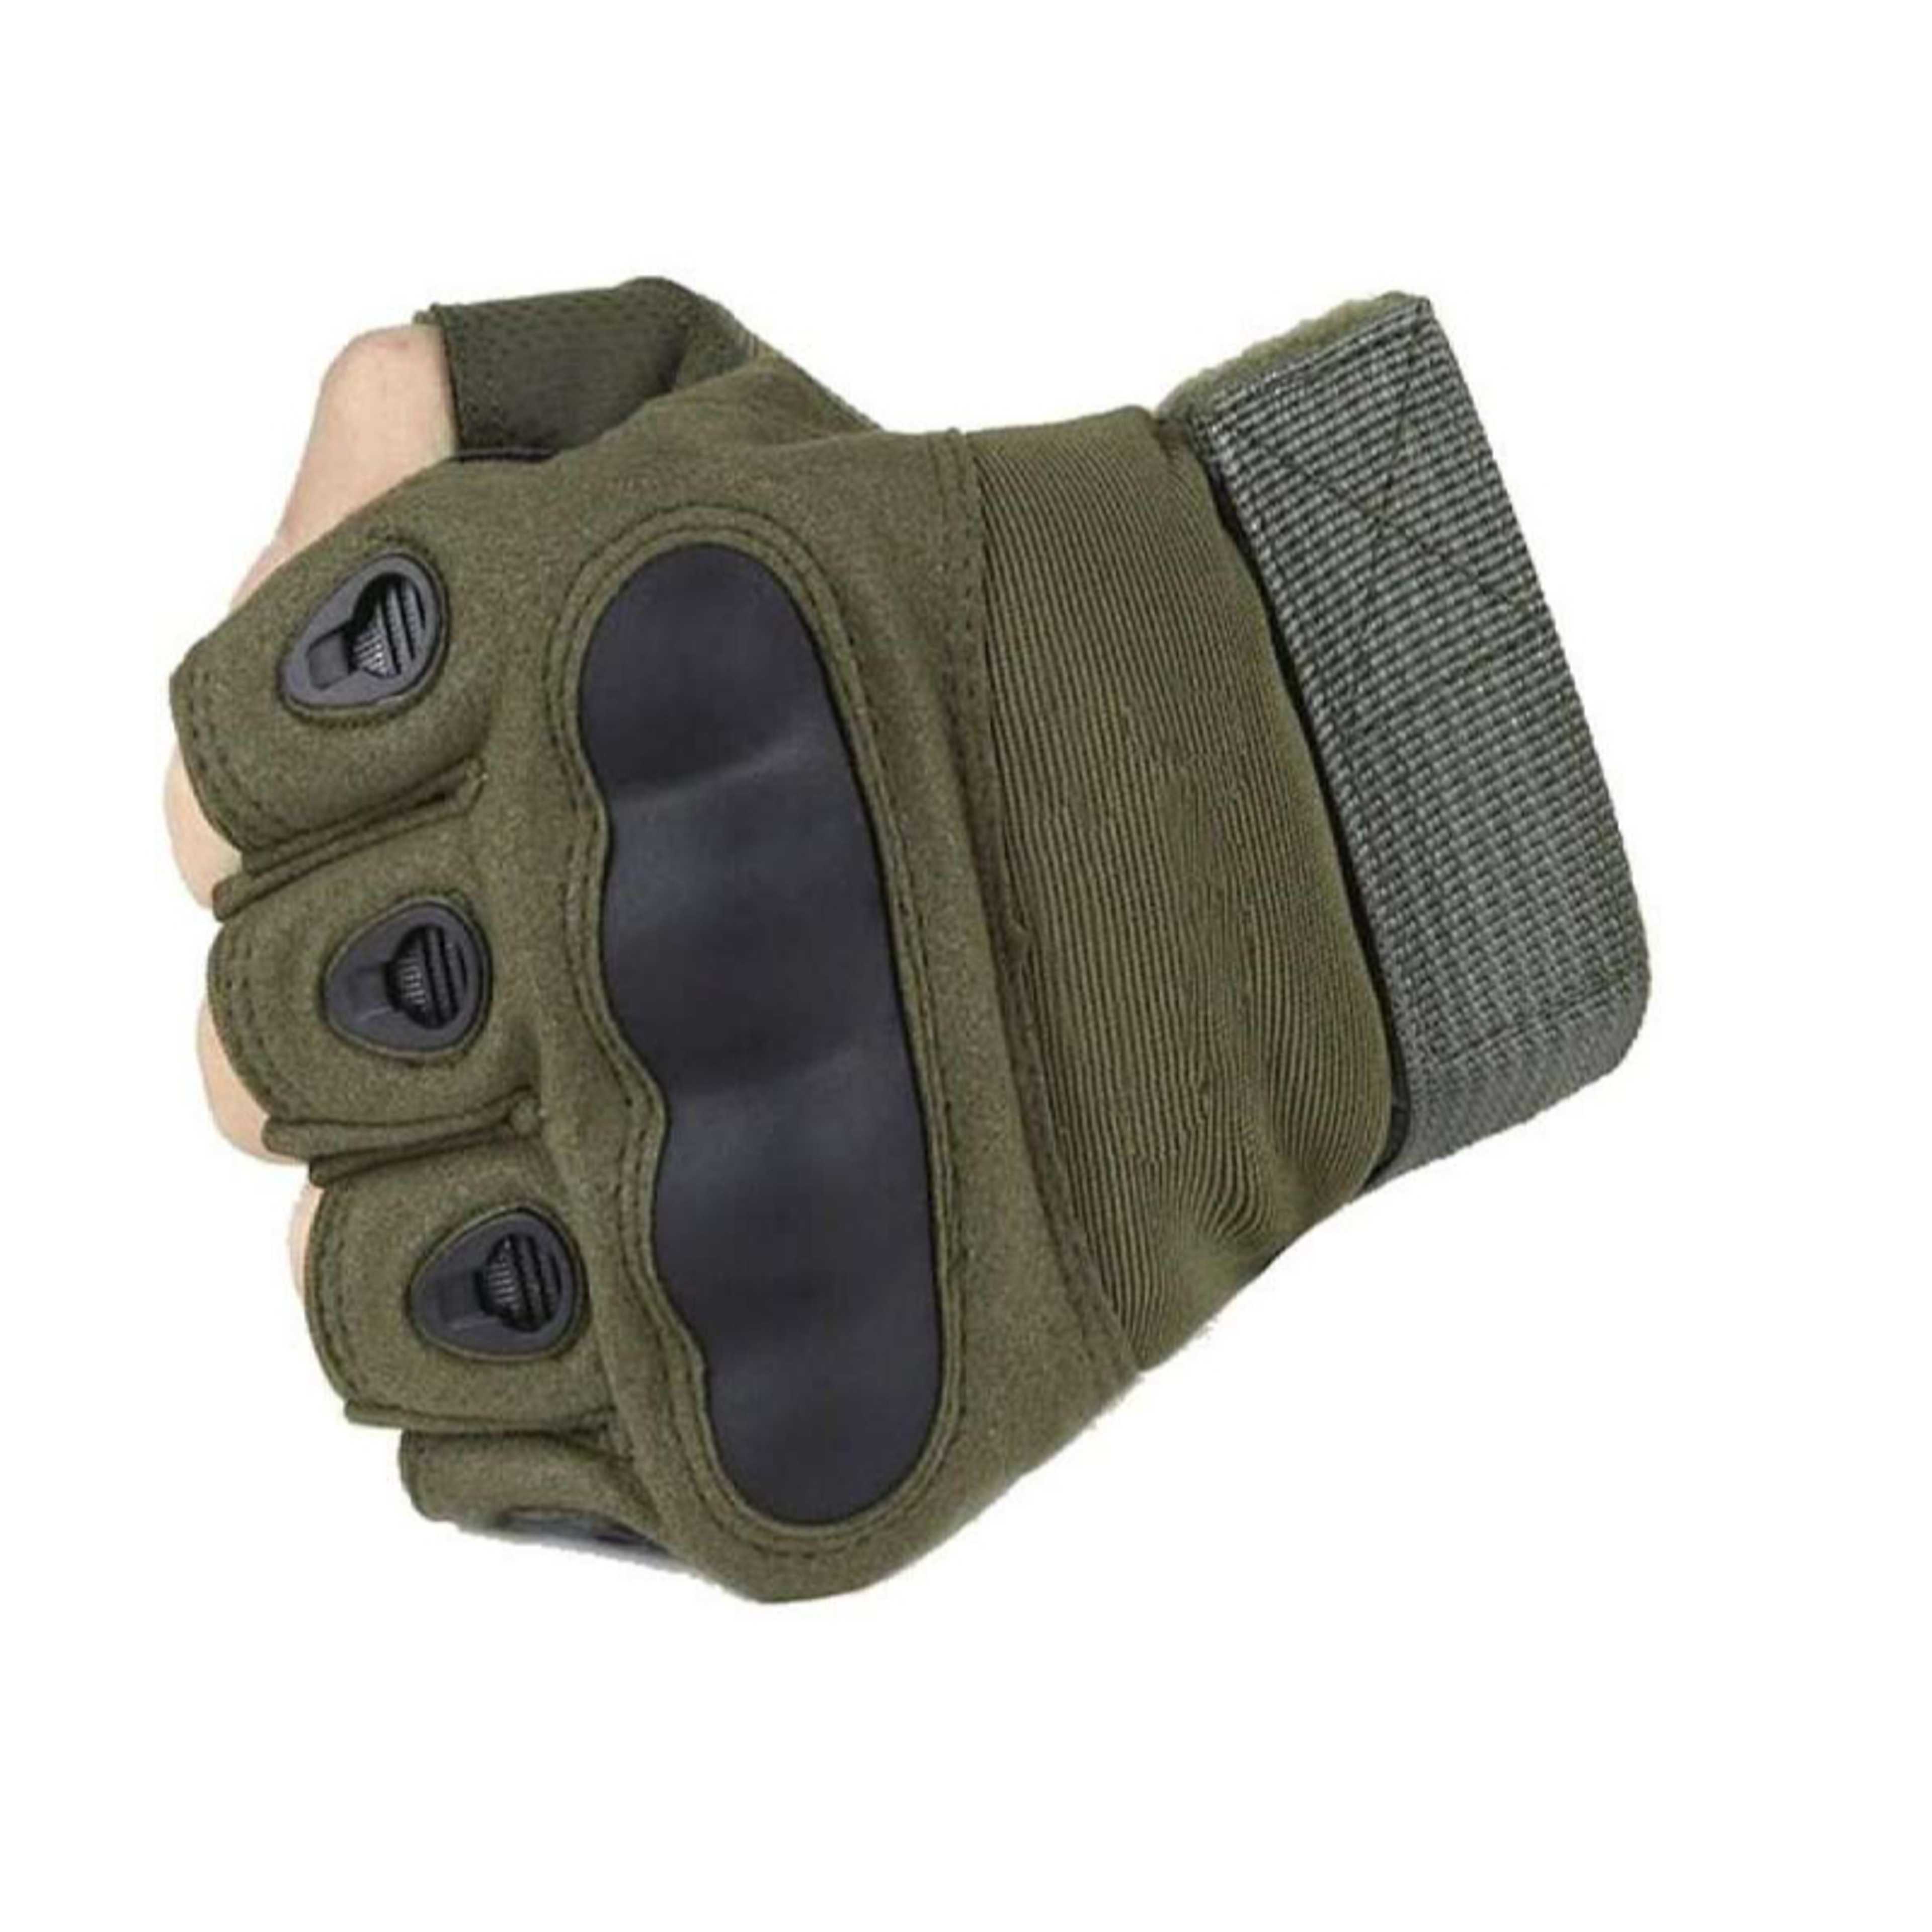 Outdoor Half Finger Safety Heavy Duty Work Gardening Cycling Gloves